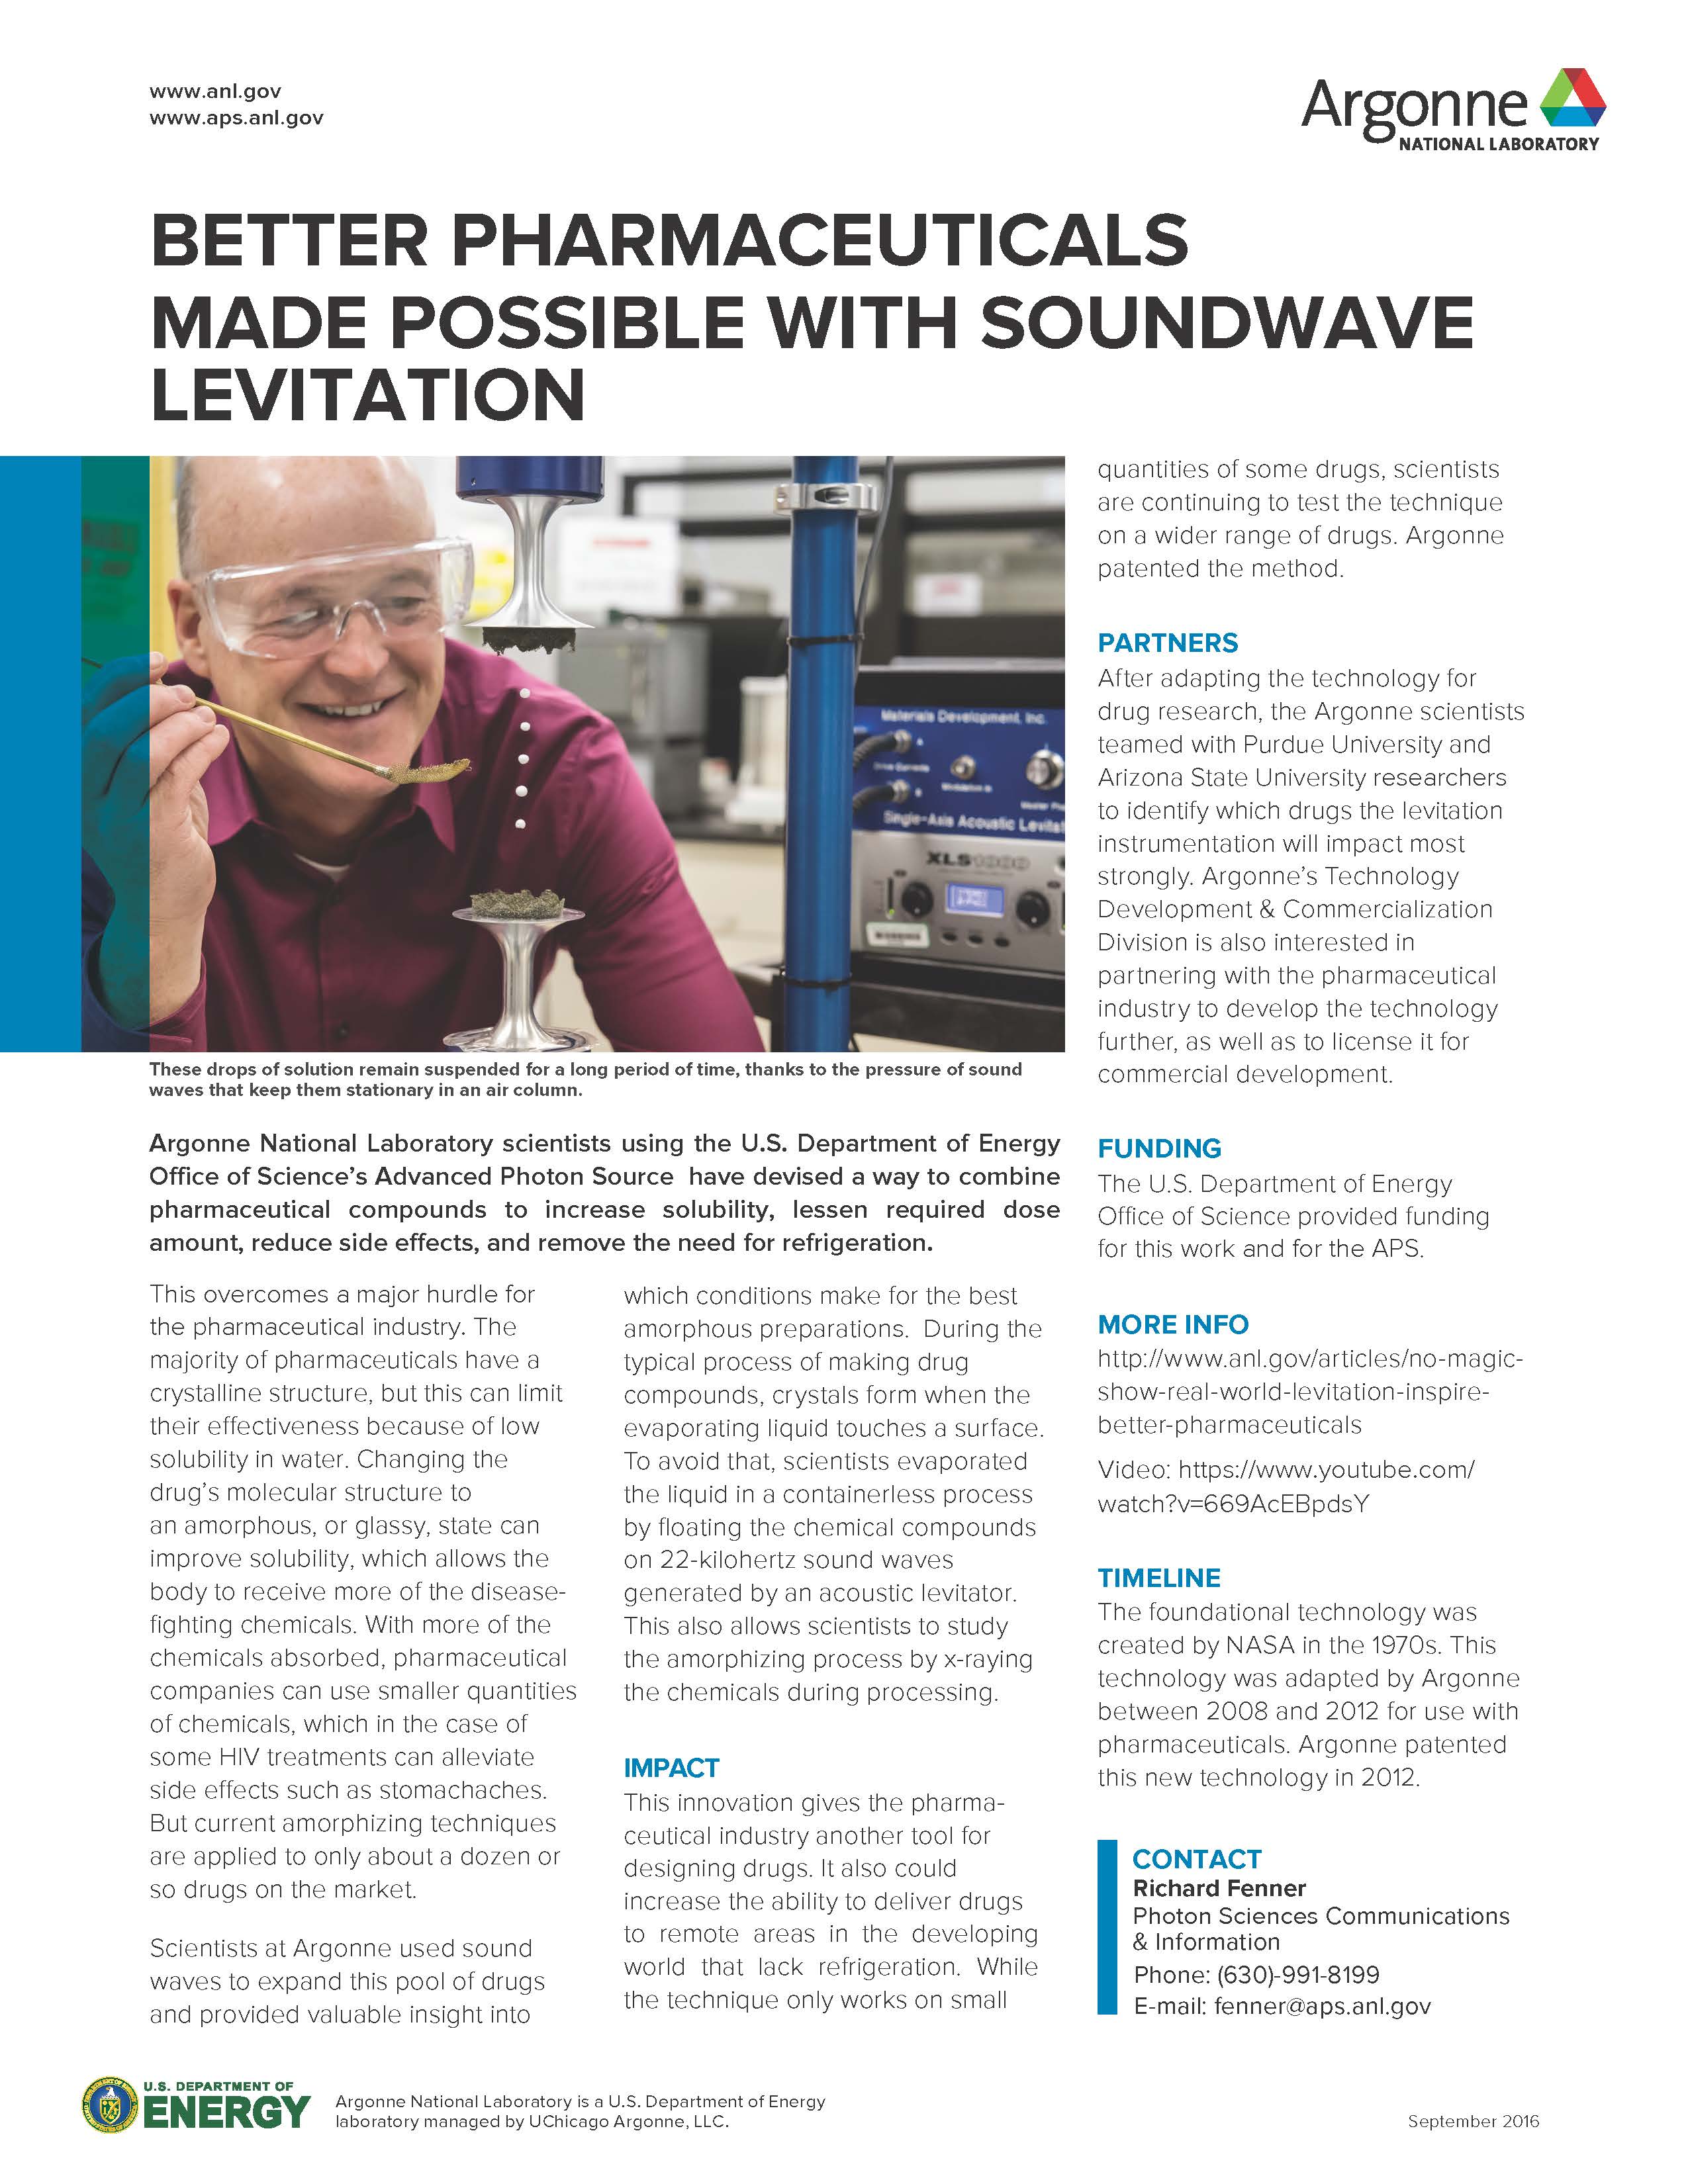 image of factsheet 'Better Pharmaceuticals Made Possible with Soundwave Levitation"